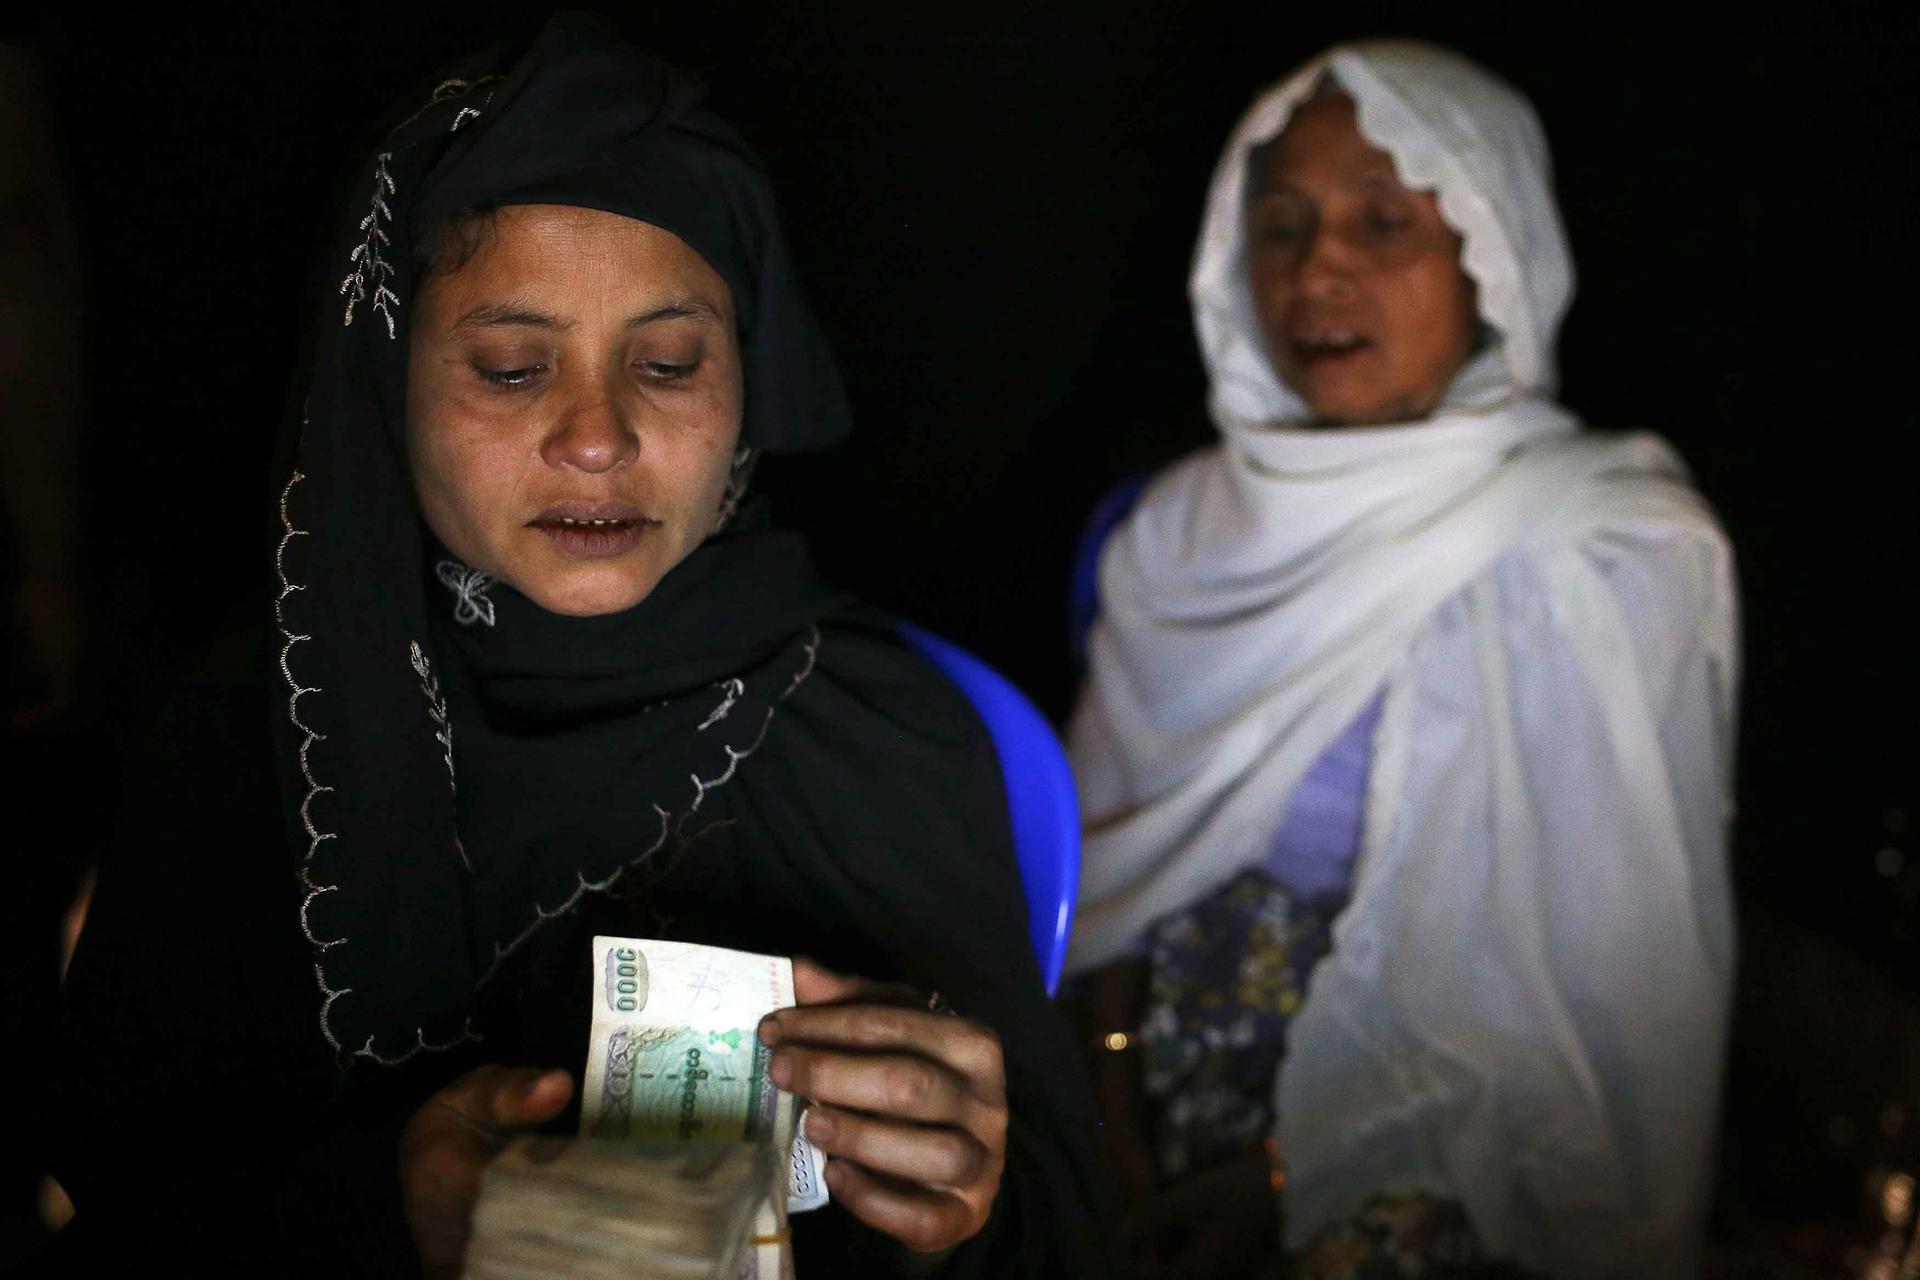 Jeweliyar, a 35-year-old Rohingya, counts out about $600 worth of Myanmar currency while her mother Toryubar, 65, watches on in an Internet hut. The money is part of a $1,500 ransom demanded for Toryubar's 23-year-old daughter, who is held by traffickers